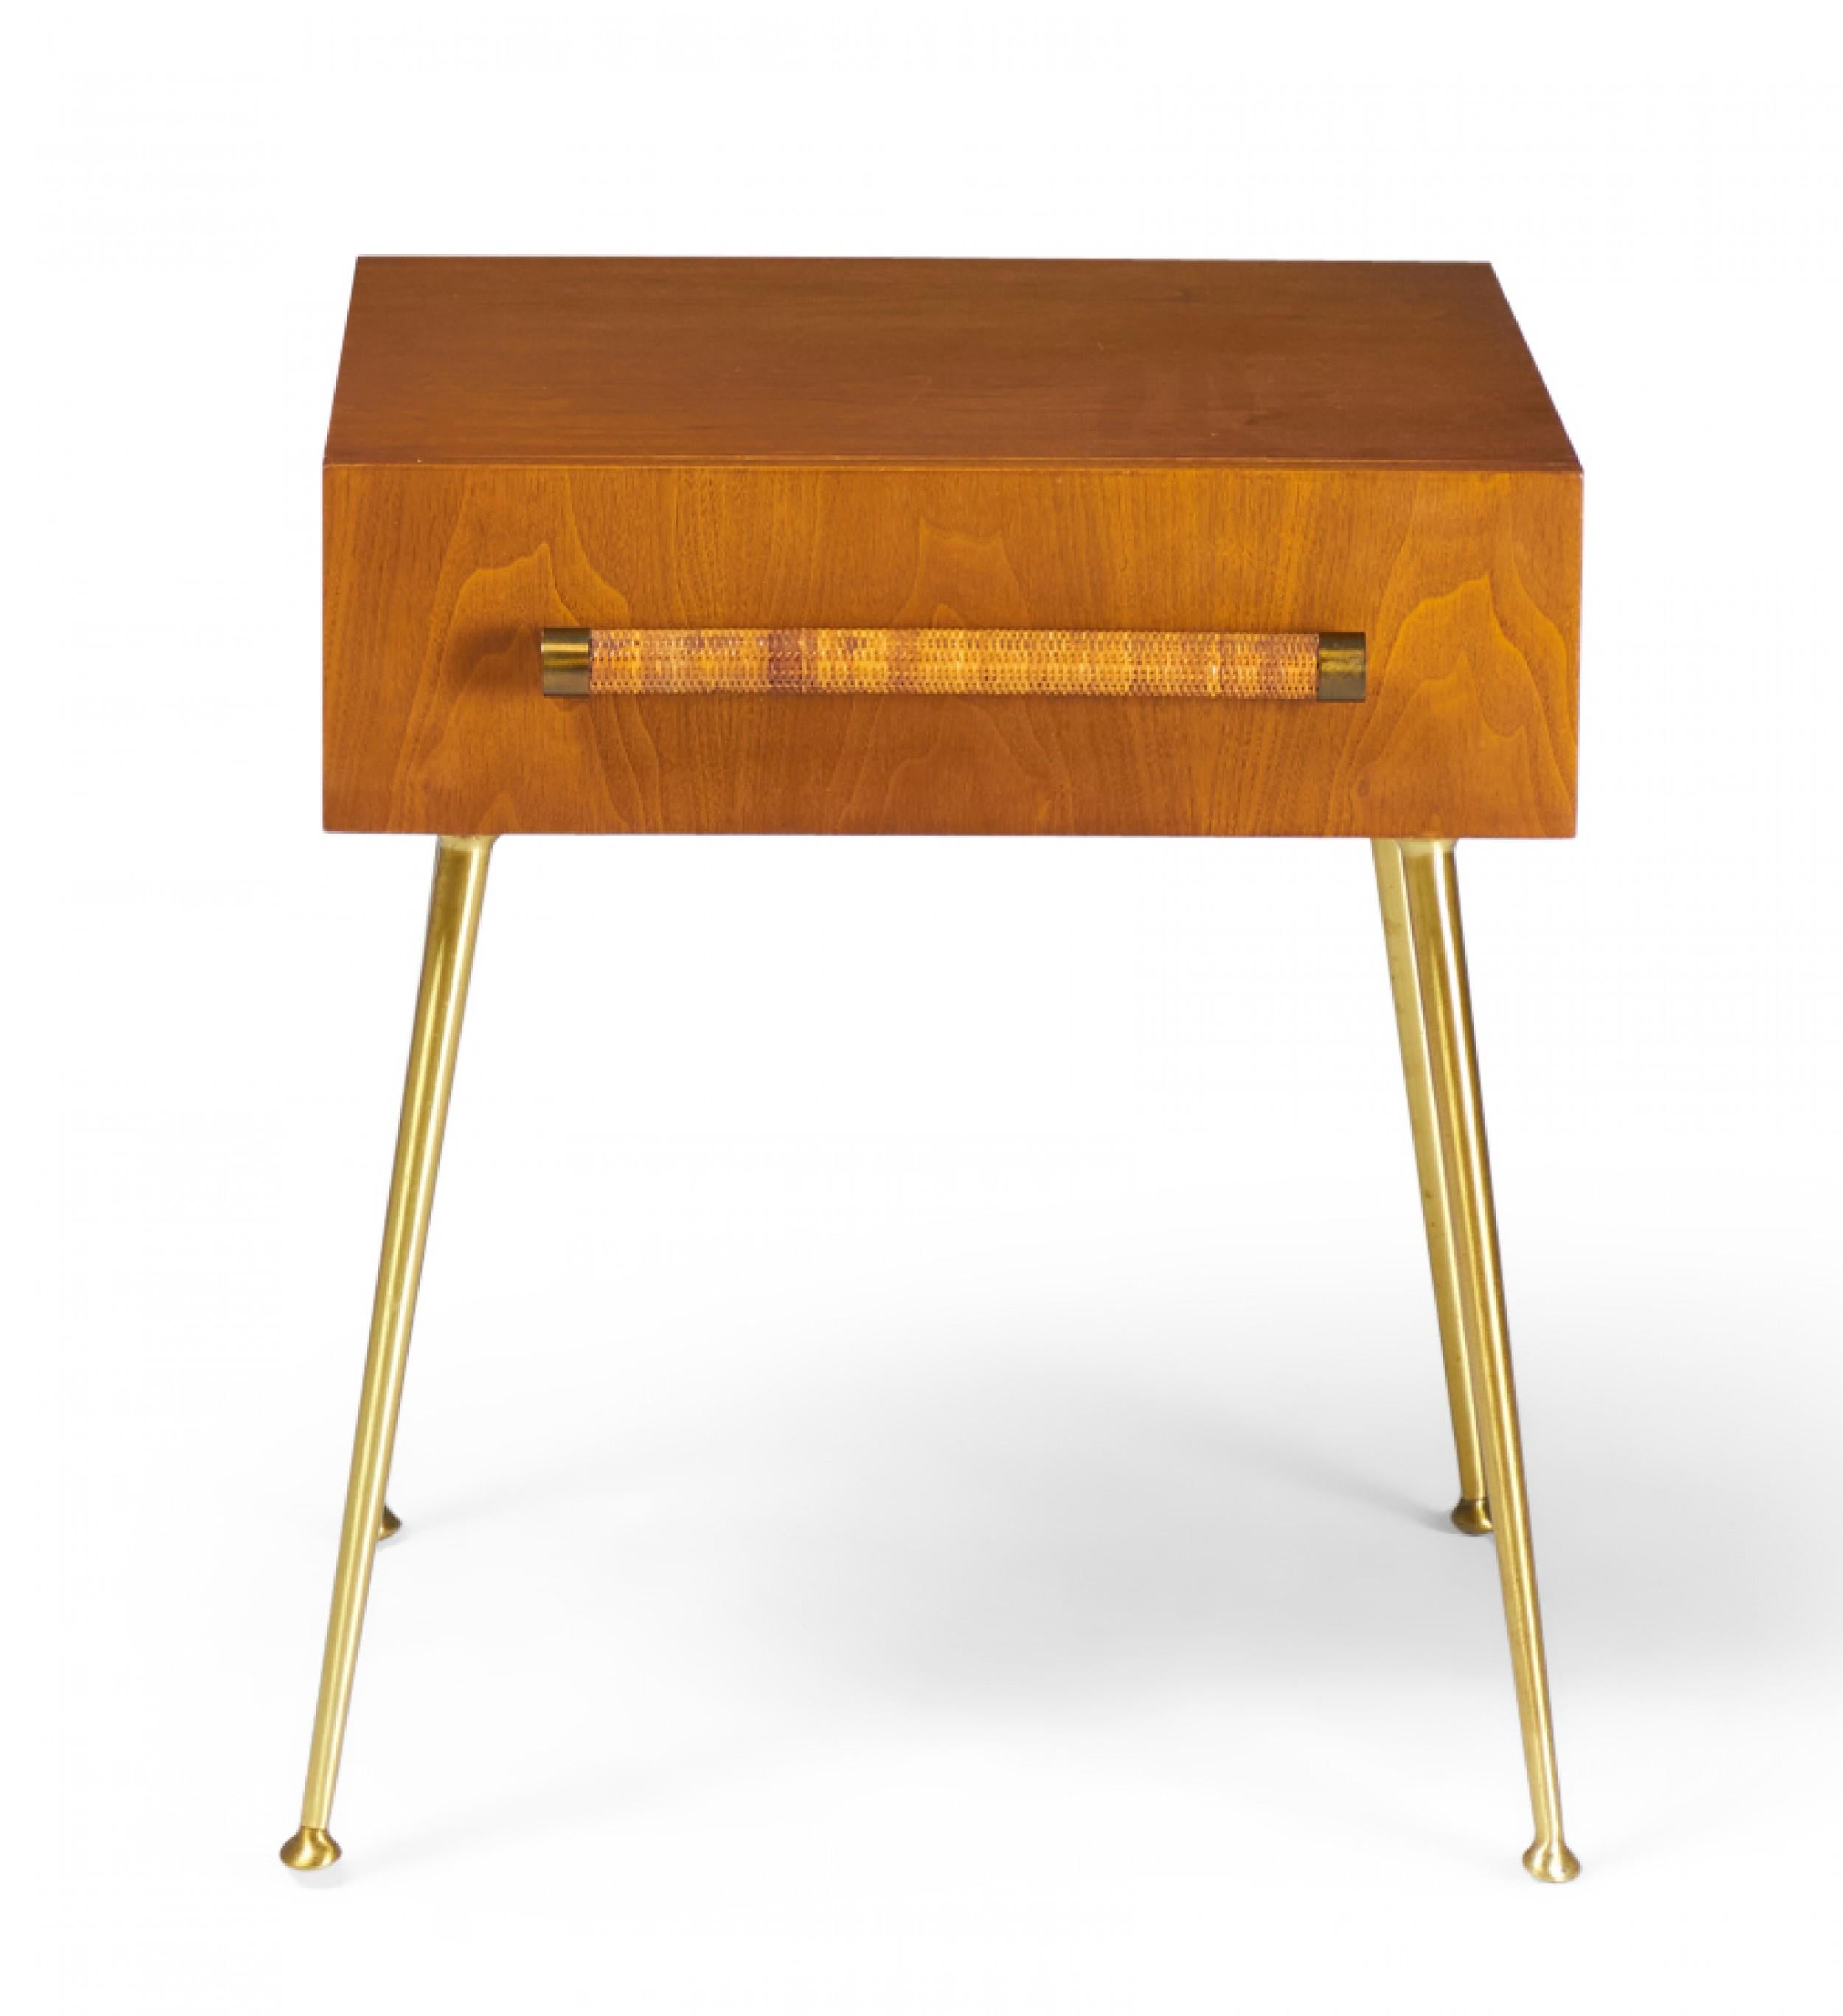 3 American mid-century (1950s) walnut single drawer nightstands with rattan-wrapped dowel drawer pulls and four tapered brass legs with circular brass feet. (T.H. Robsjohn-Gibbings for Widdicomb)(Priced each).